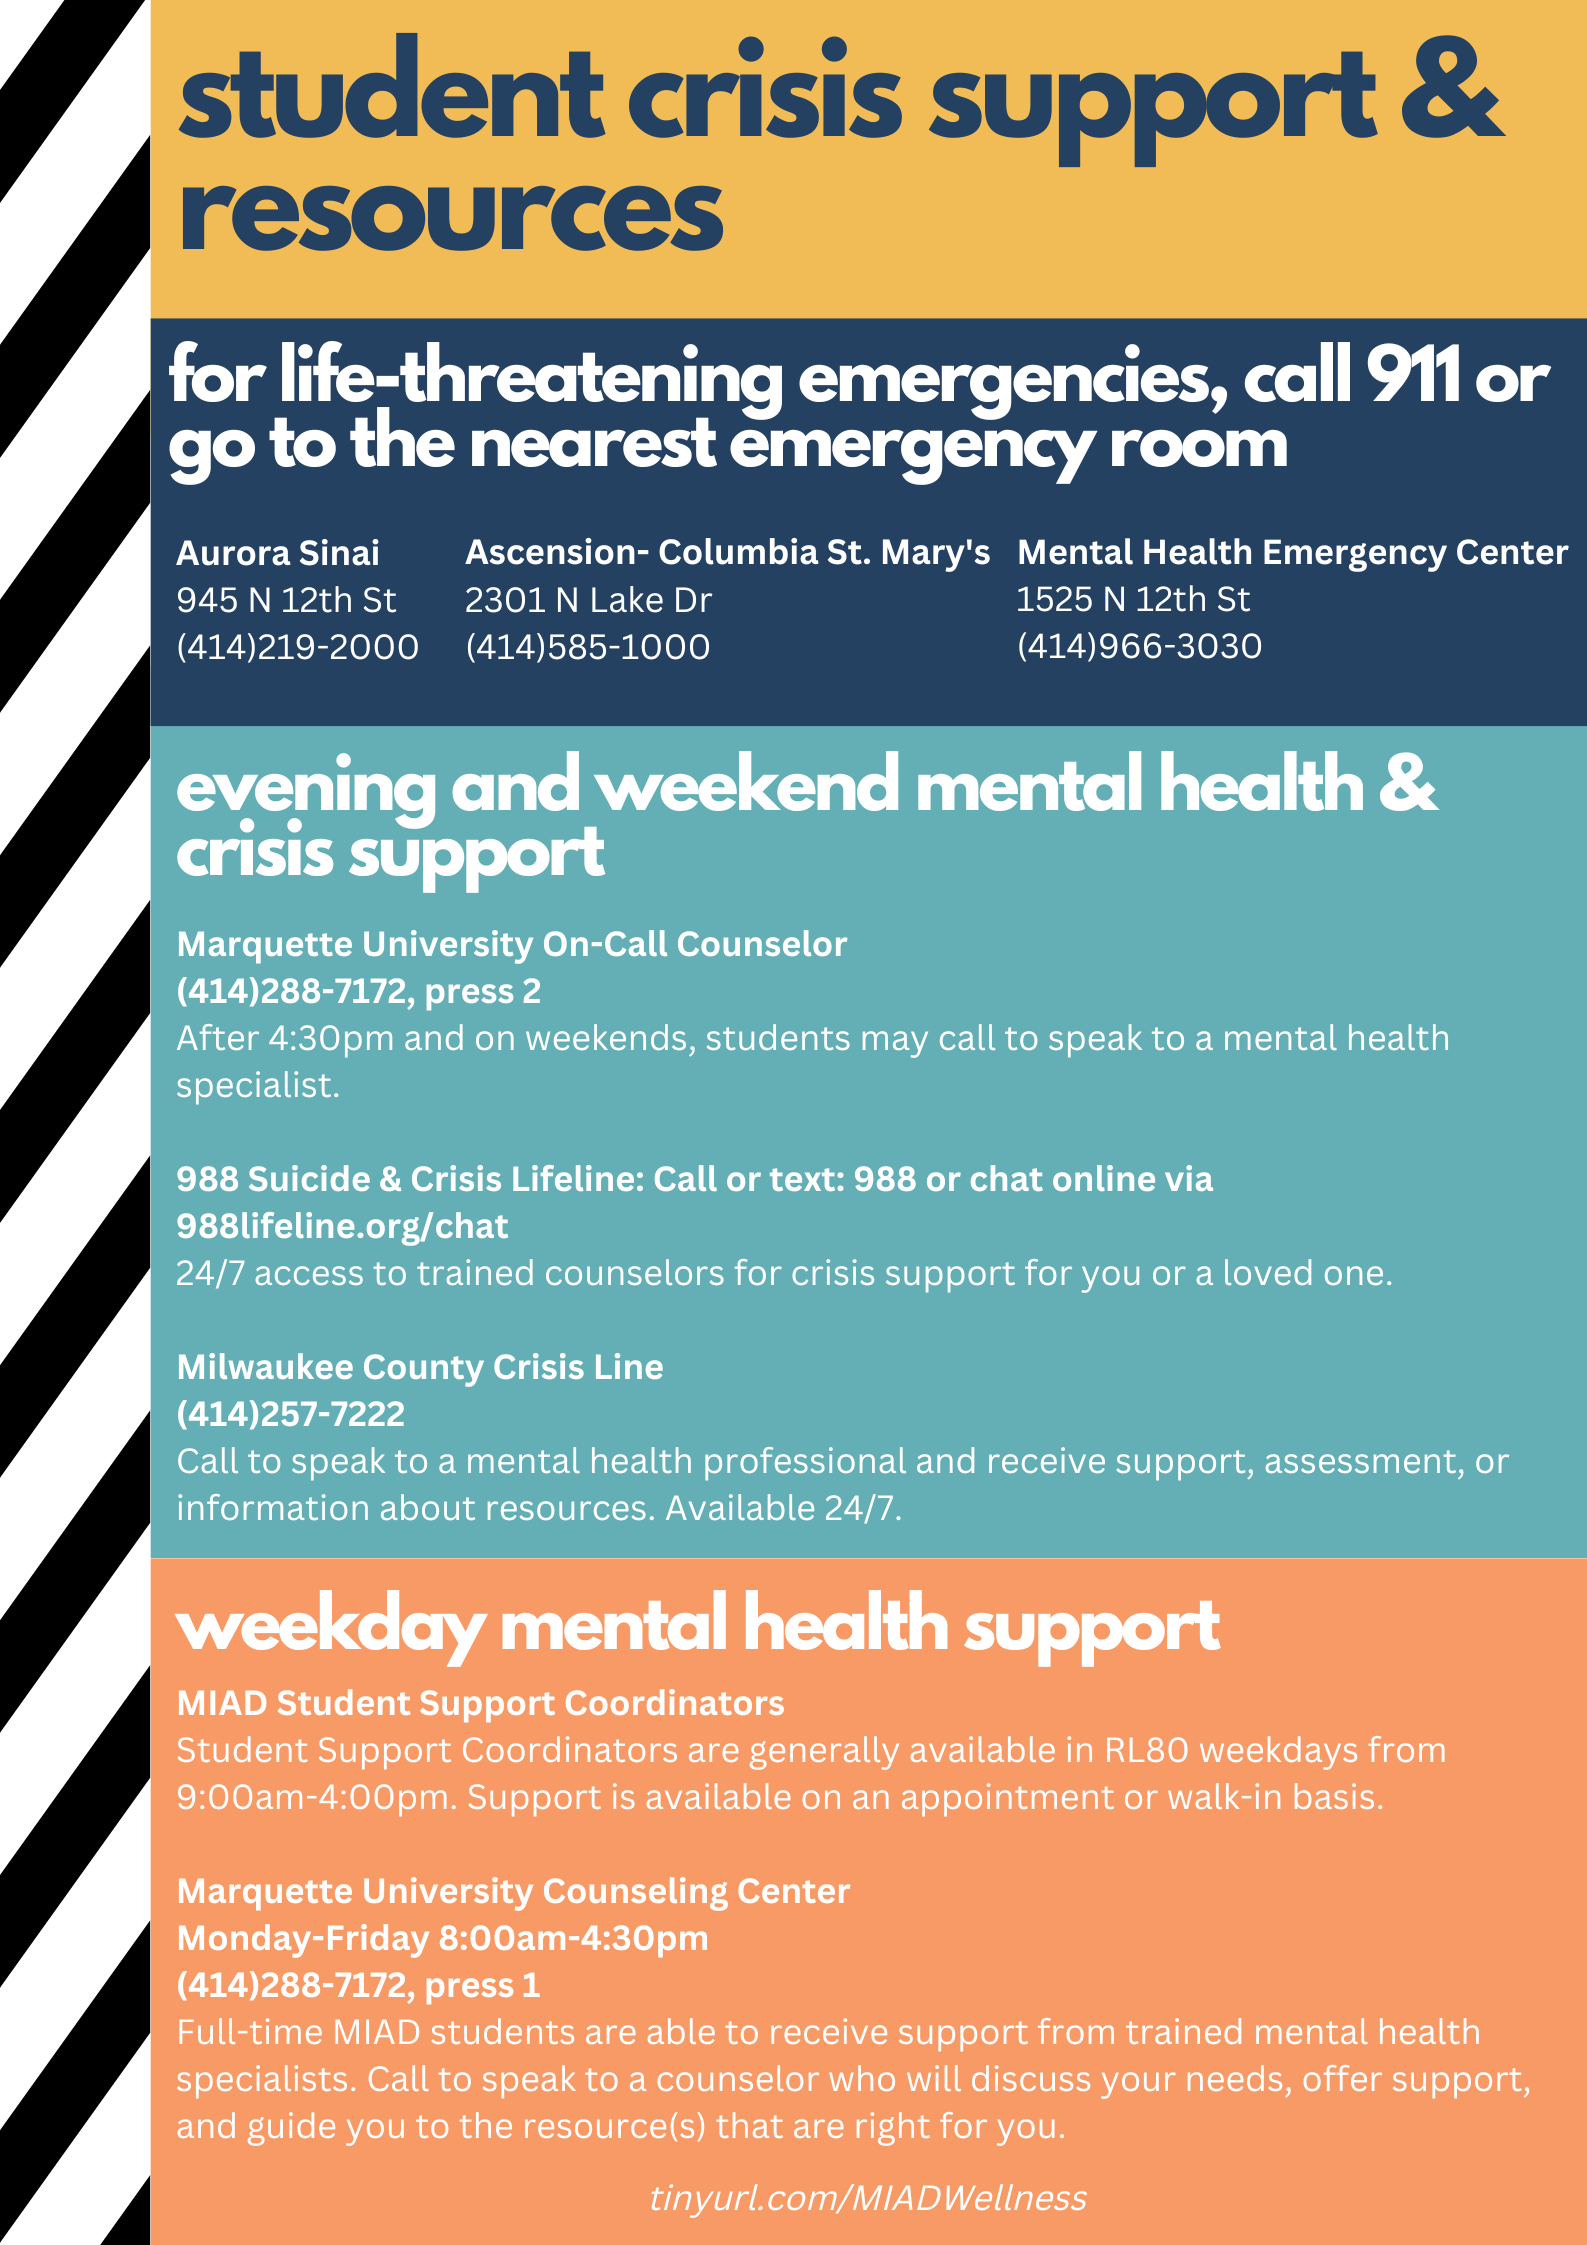 Crisis Support & Mental Health Resources for Students